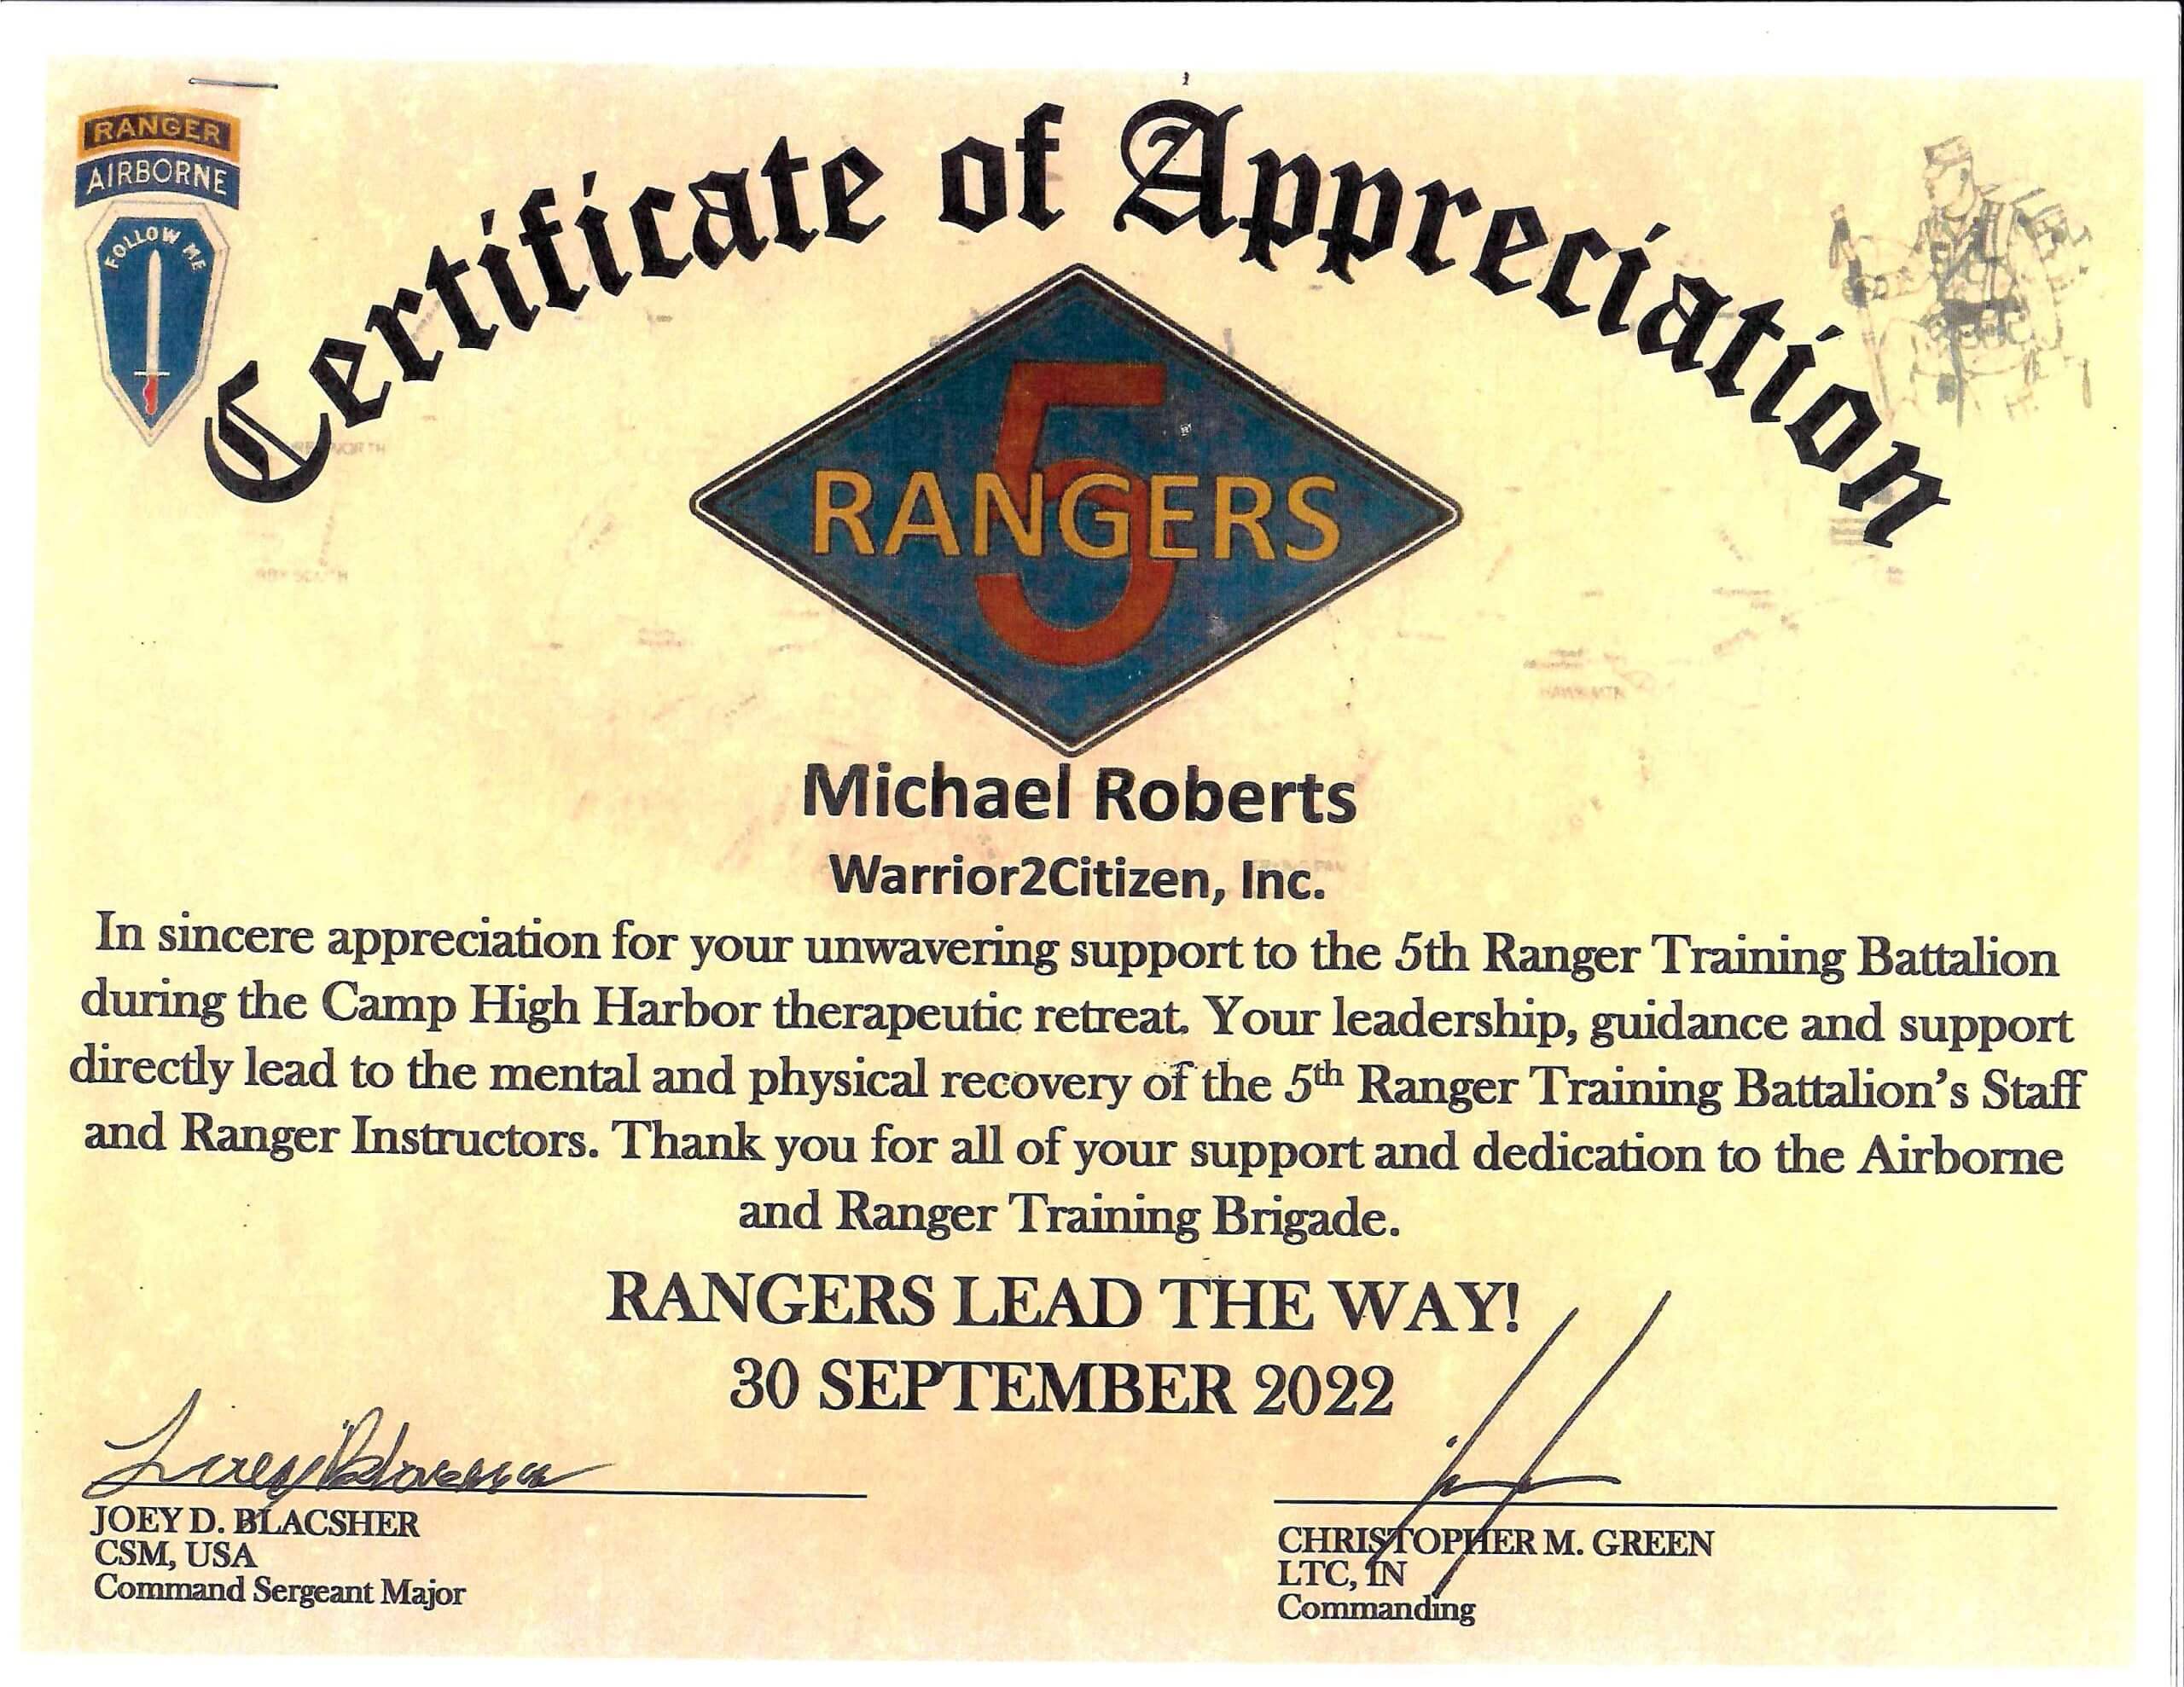 5th Ranger Training Btn recognizes W2C for their contribution